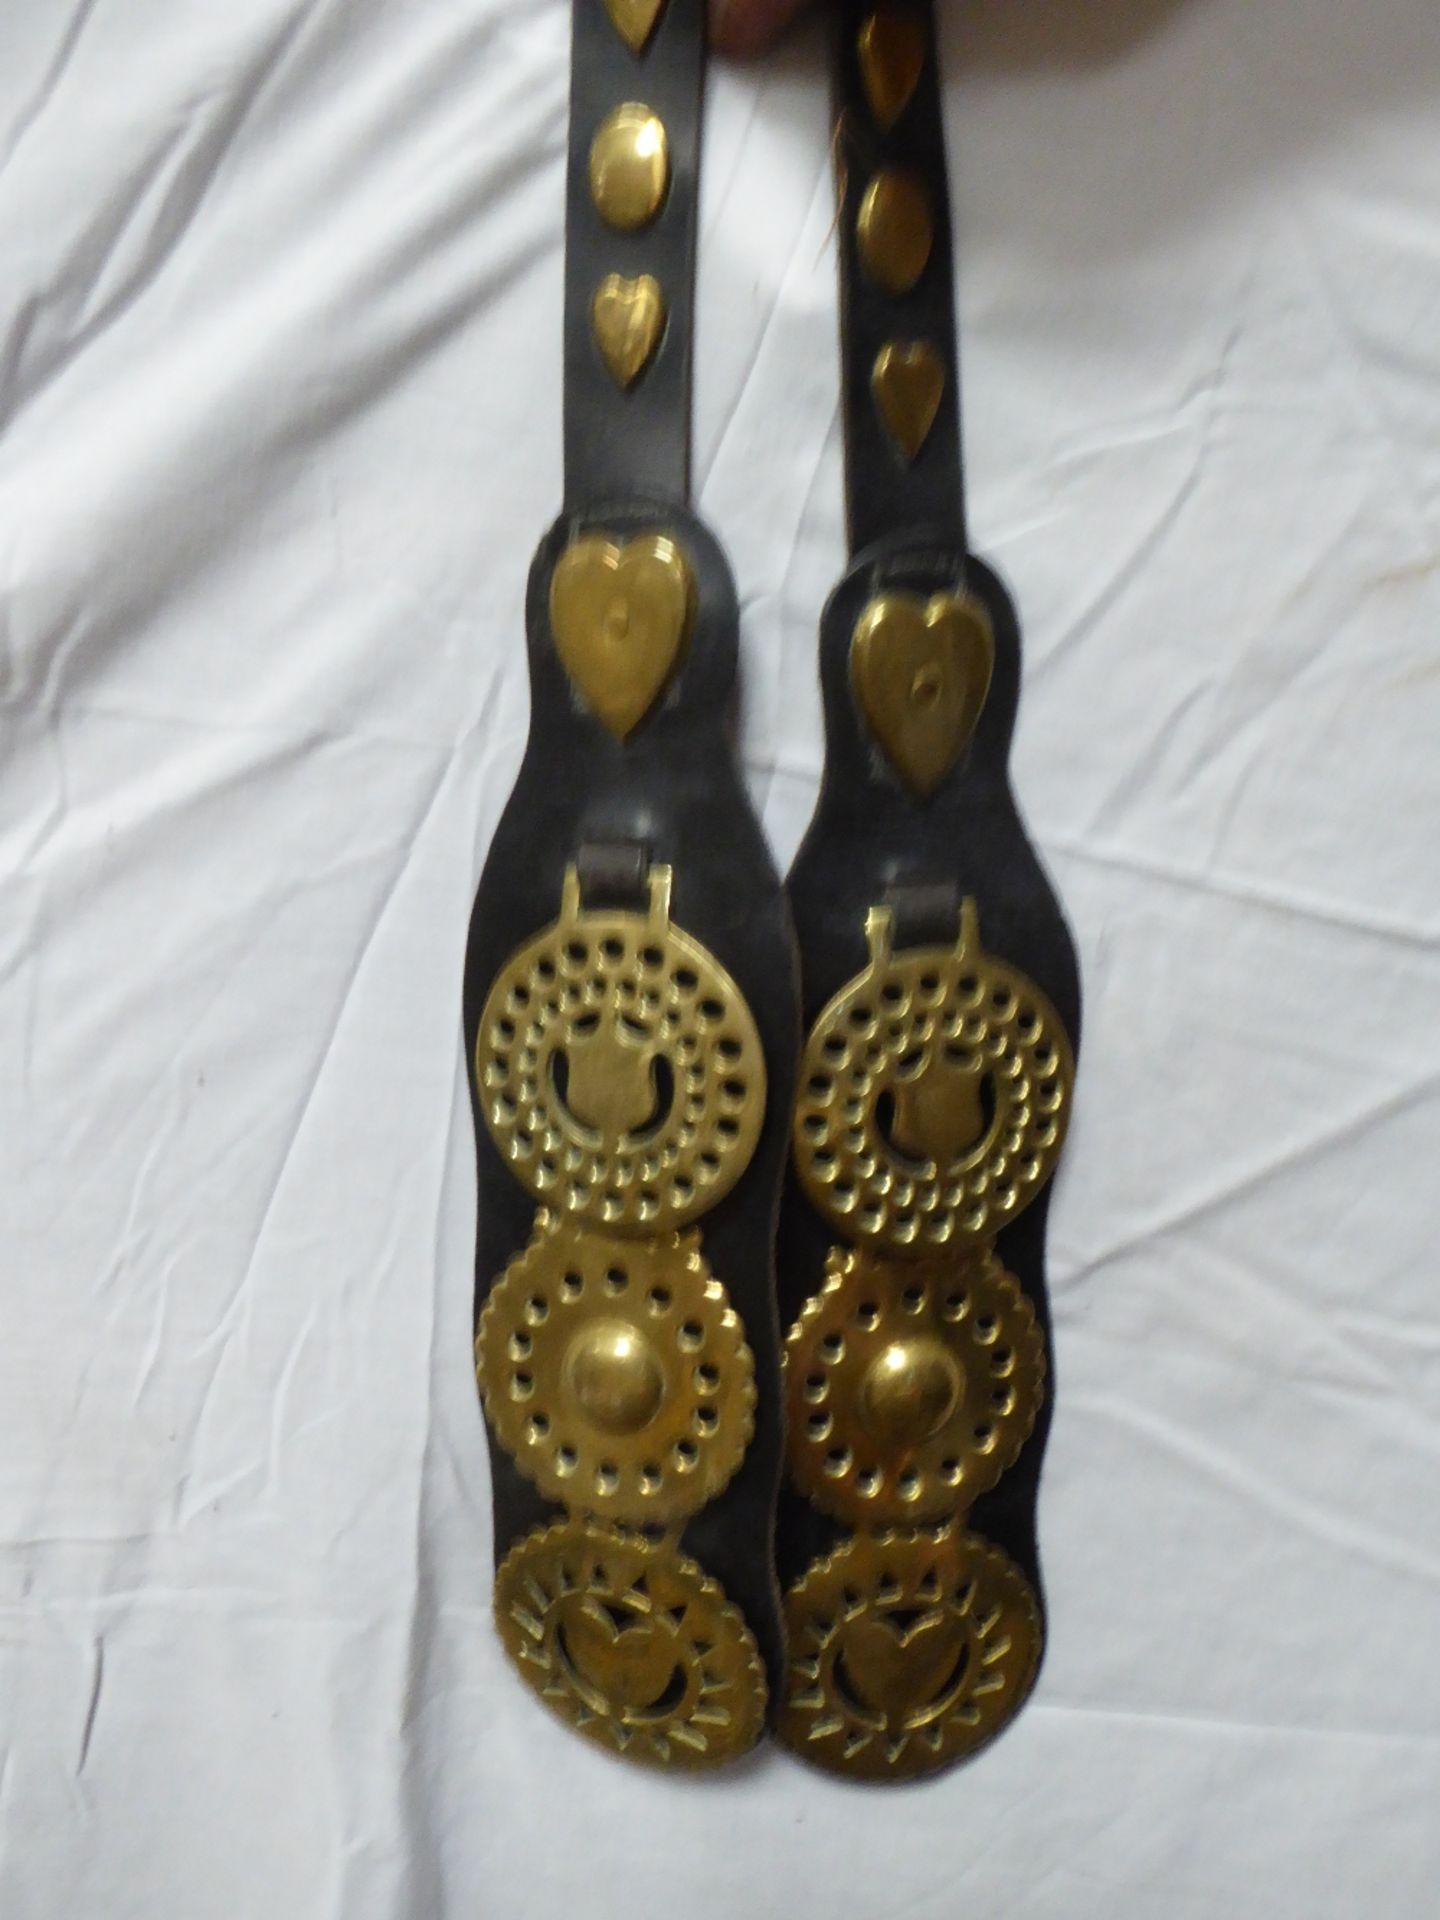 Long leather jointed strap each with three brasses